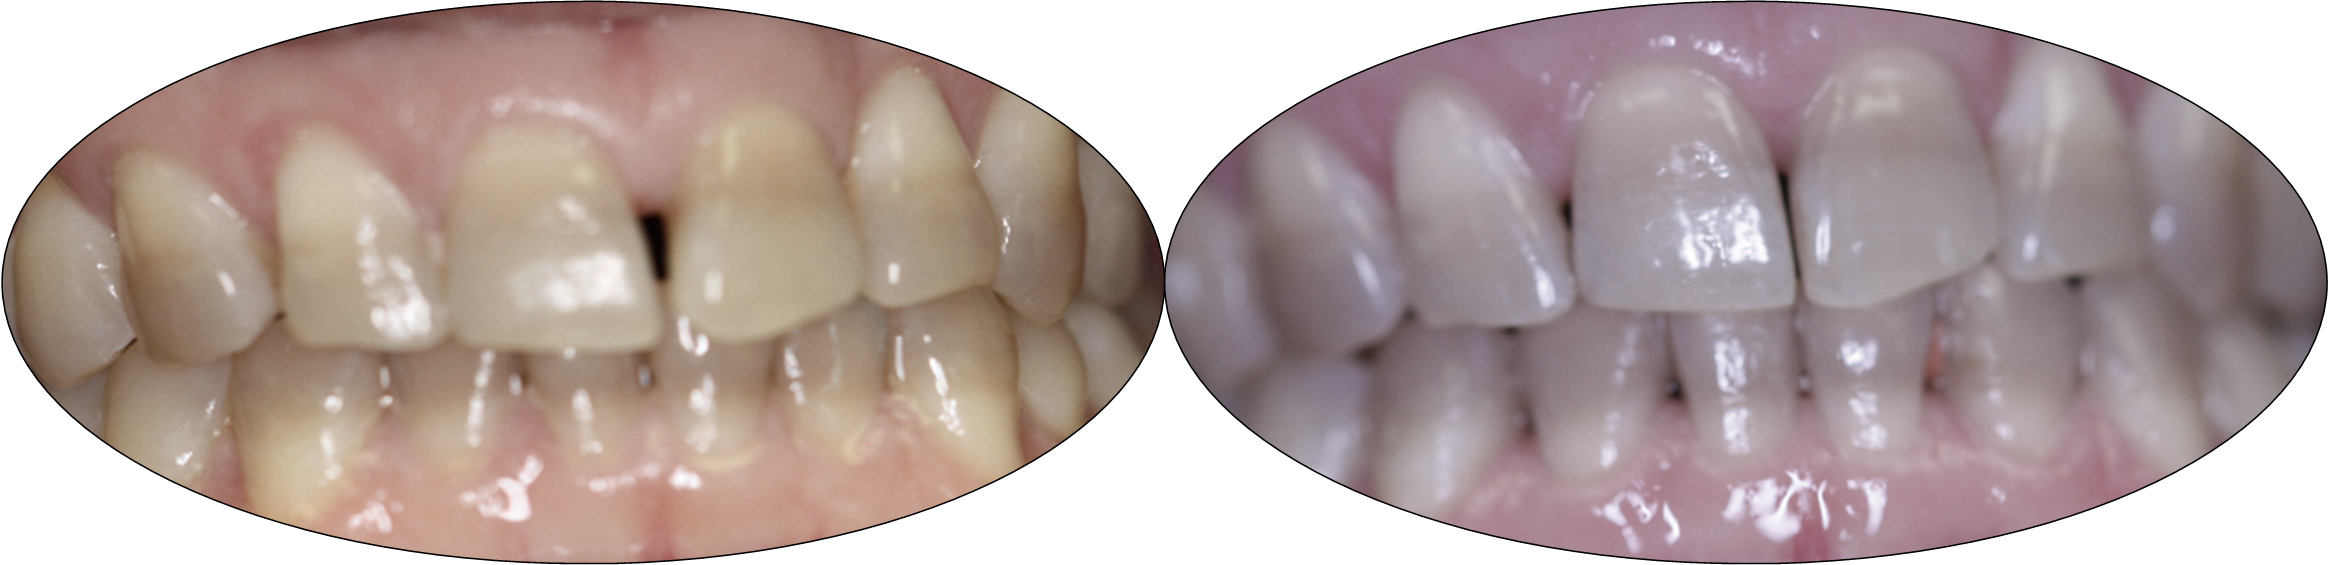 Smile gallery images, before and after Invisalign, patient two